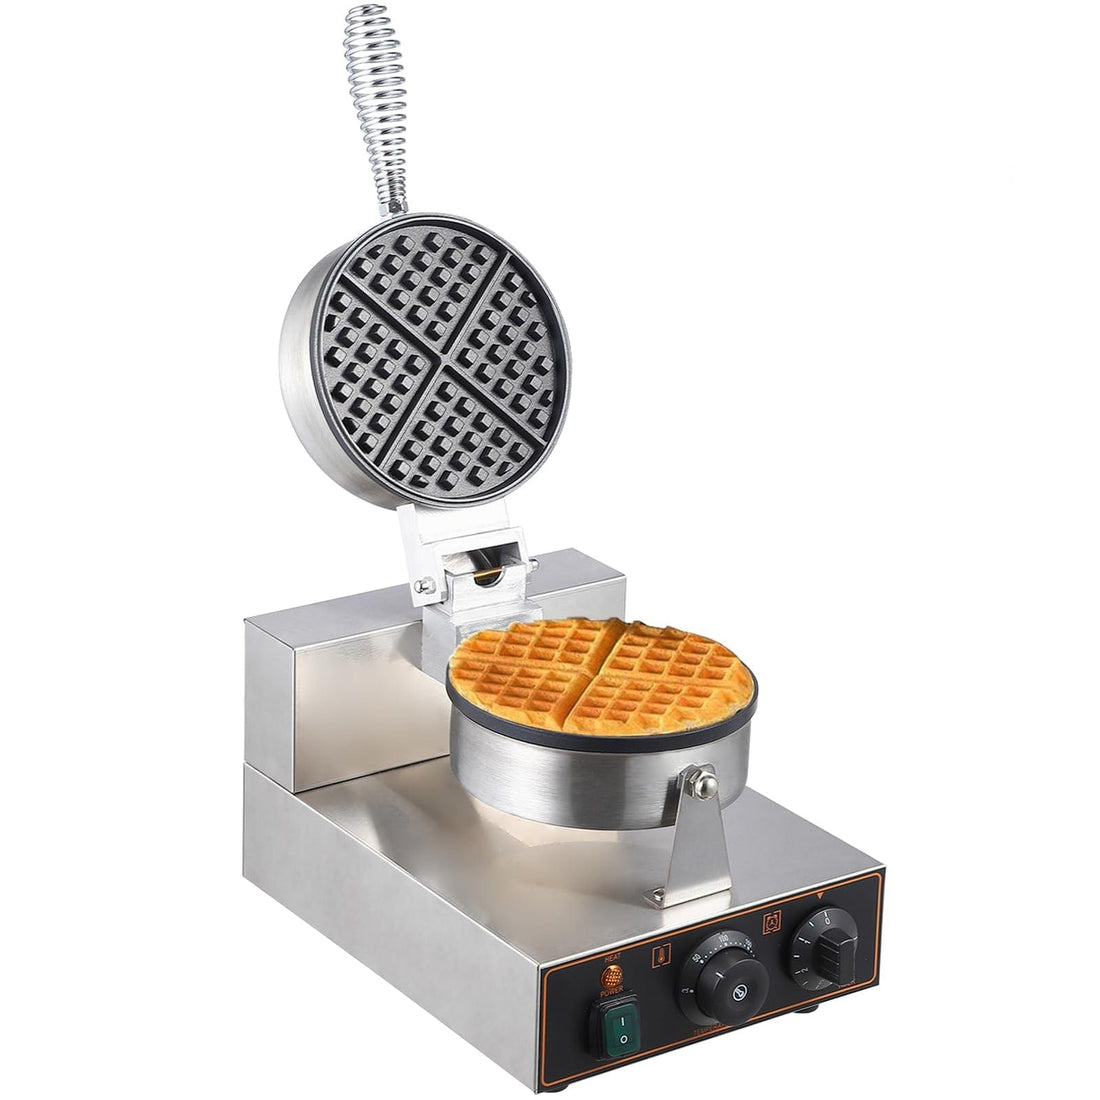 110V 1200W Stainless Steel Waffle Cone Maker, Temp&Time Settings